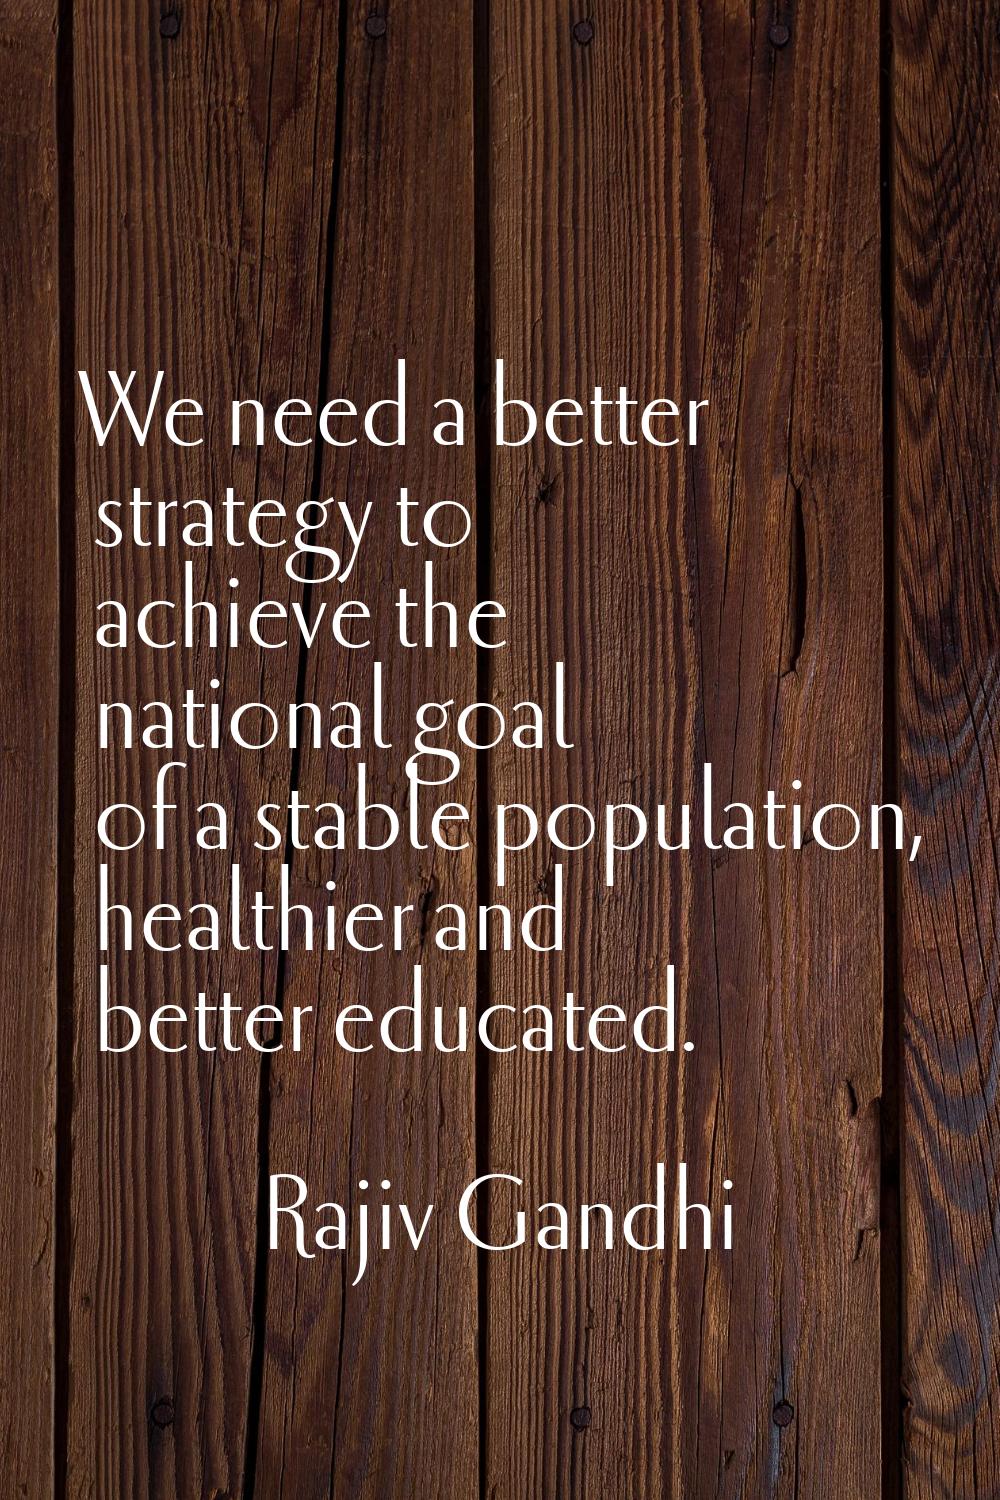 We need a better strategy to achieve the national goal of a stable population, healthier and better